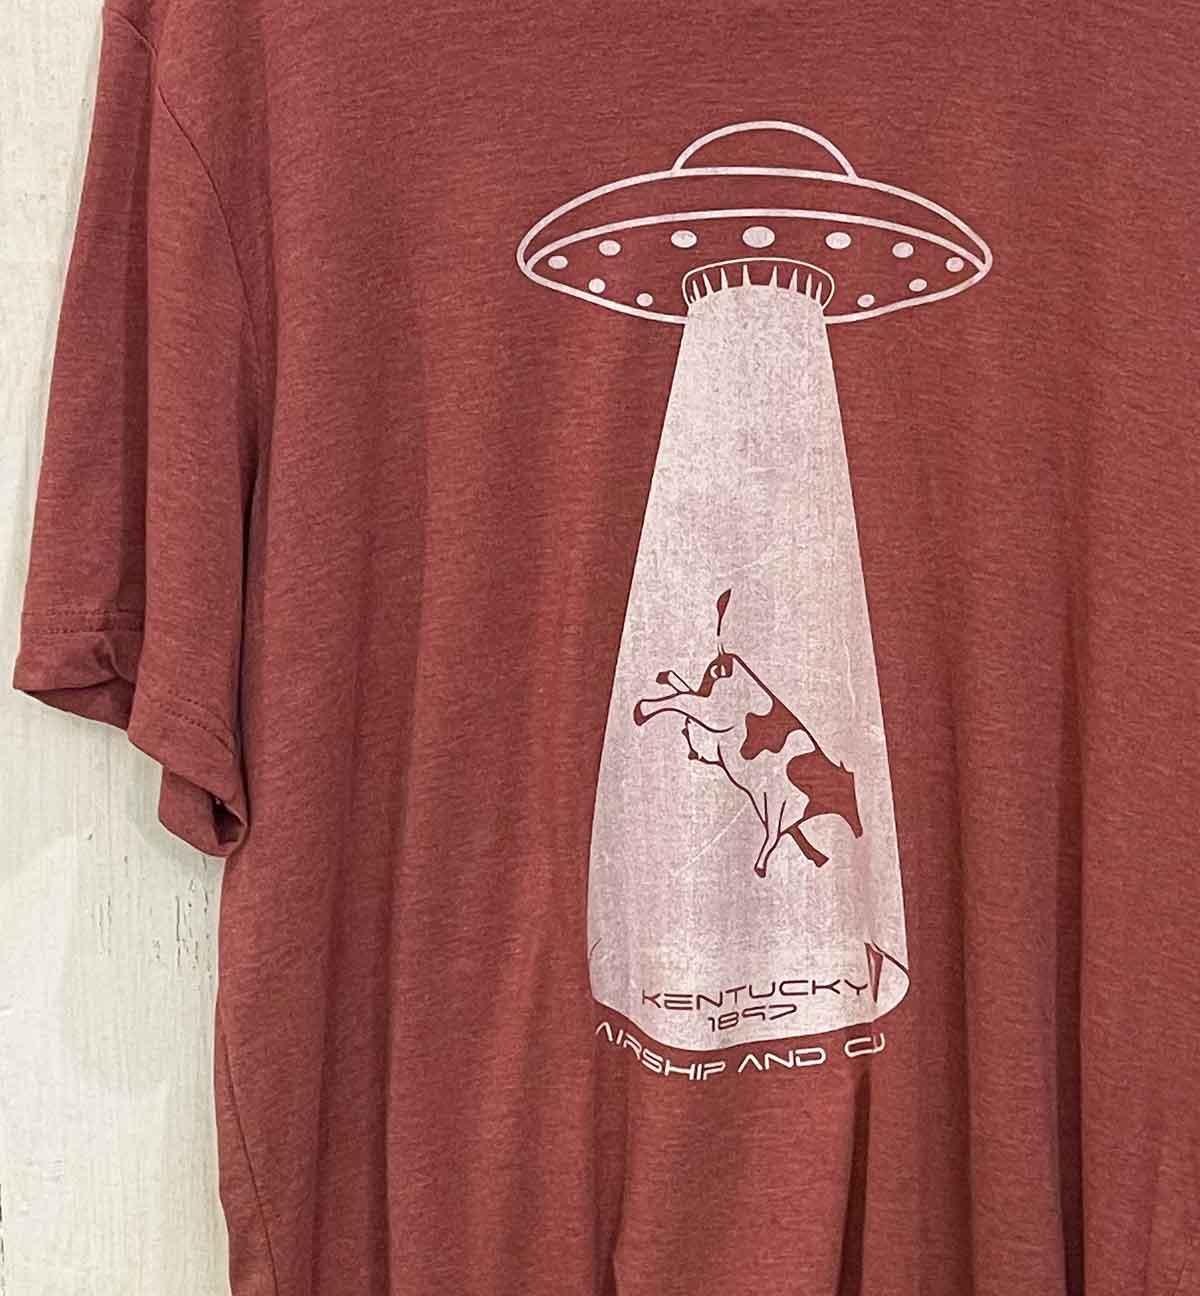 Airship and Cow Tshirt - HOT DEAL🔥 - NOGGINHED